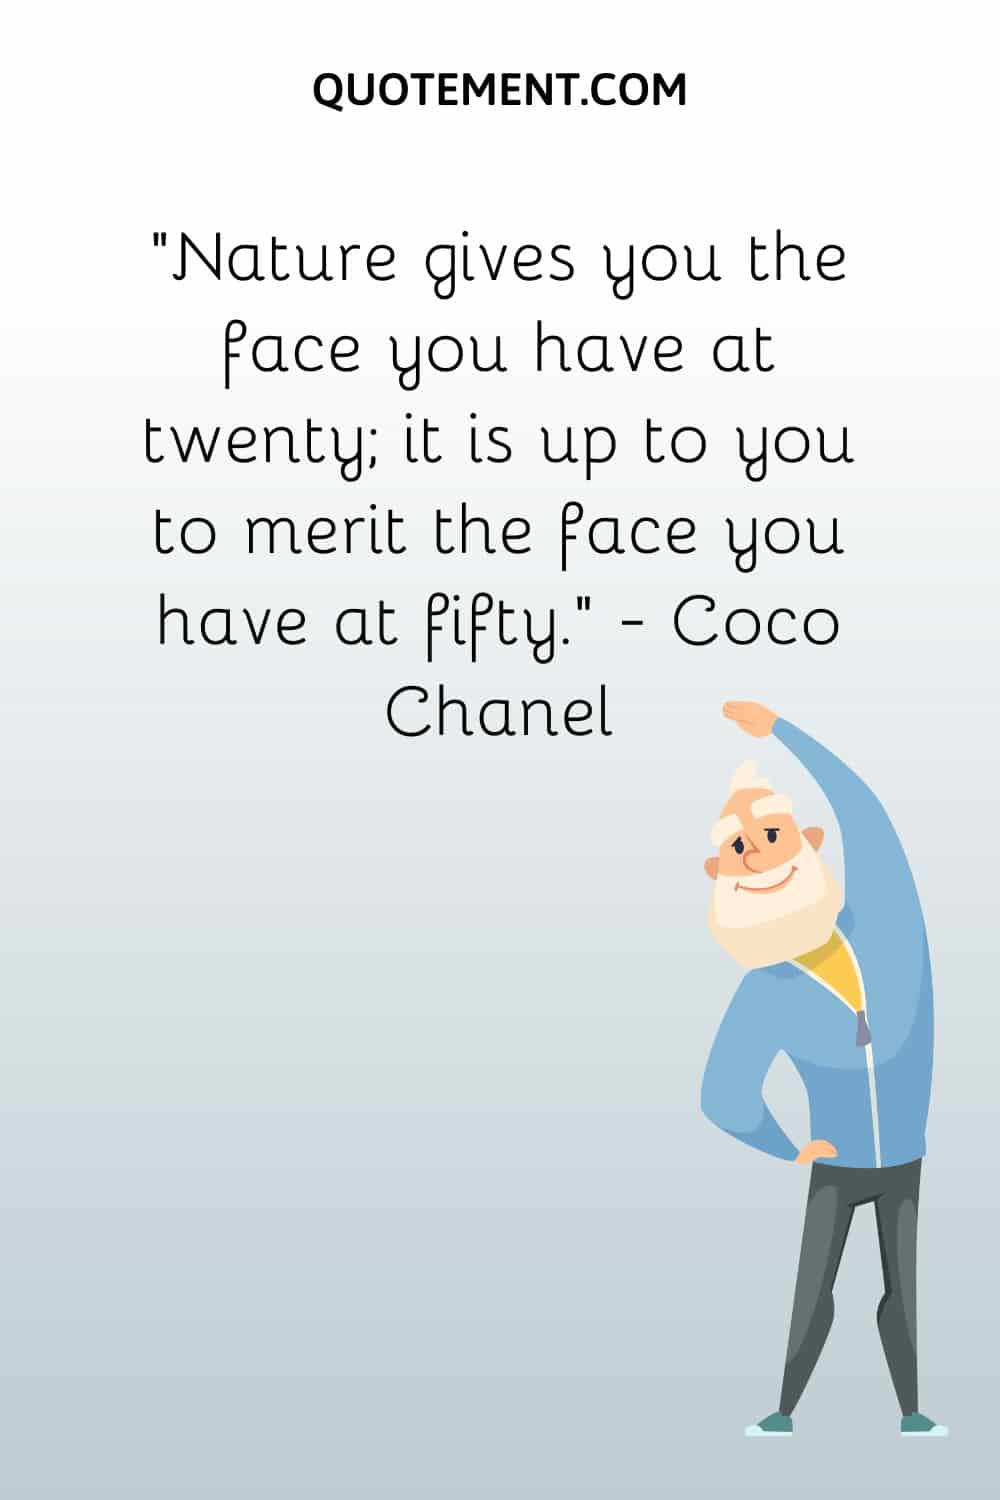 Nature gives you the face you have at twenty; it is up to you to merit the face you have at fifty.